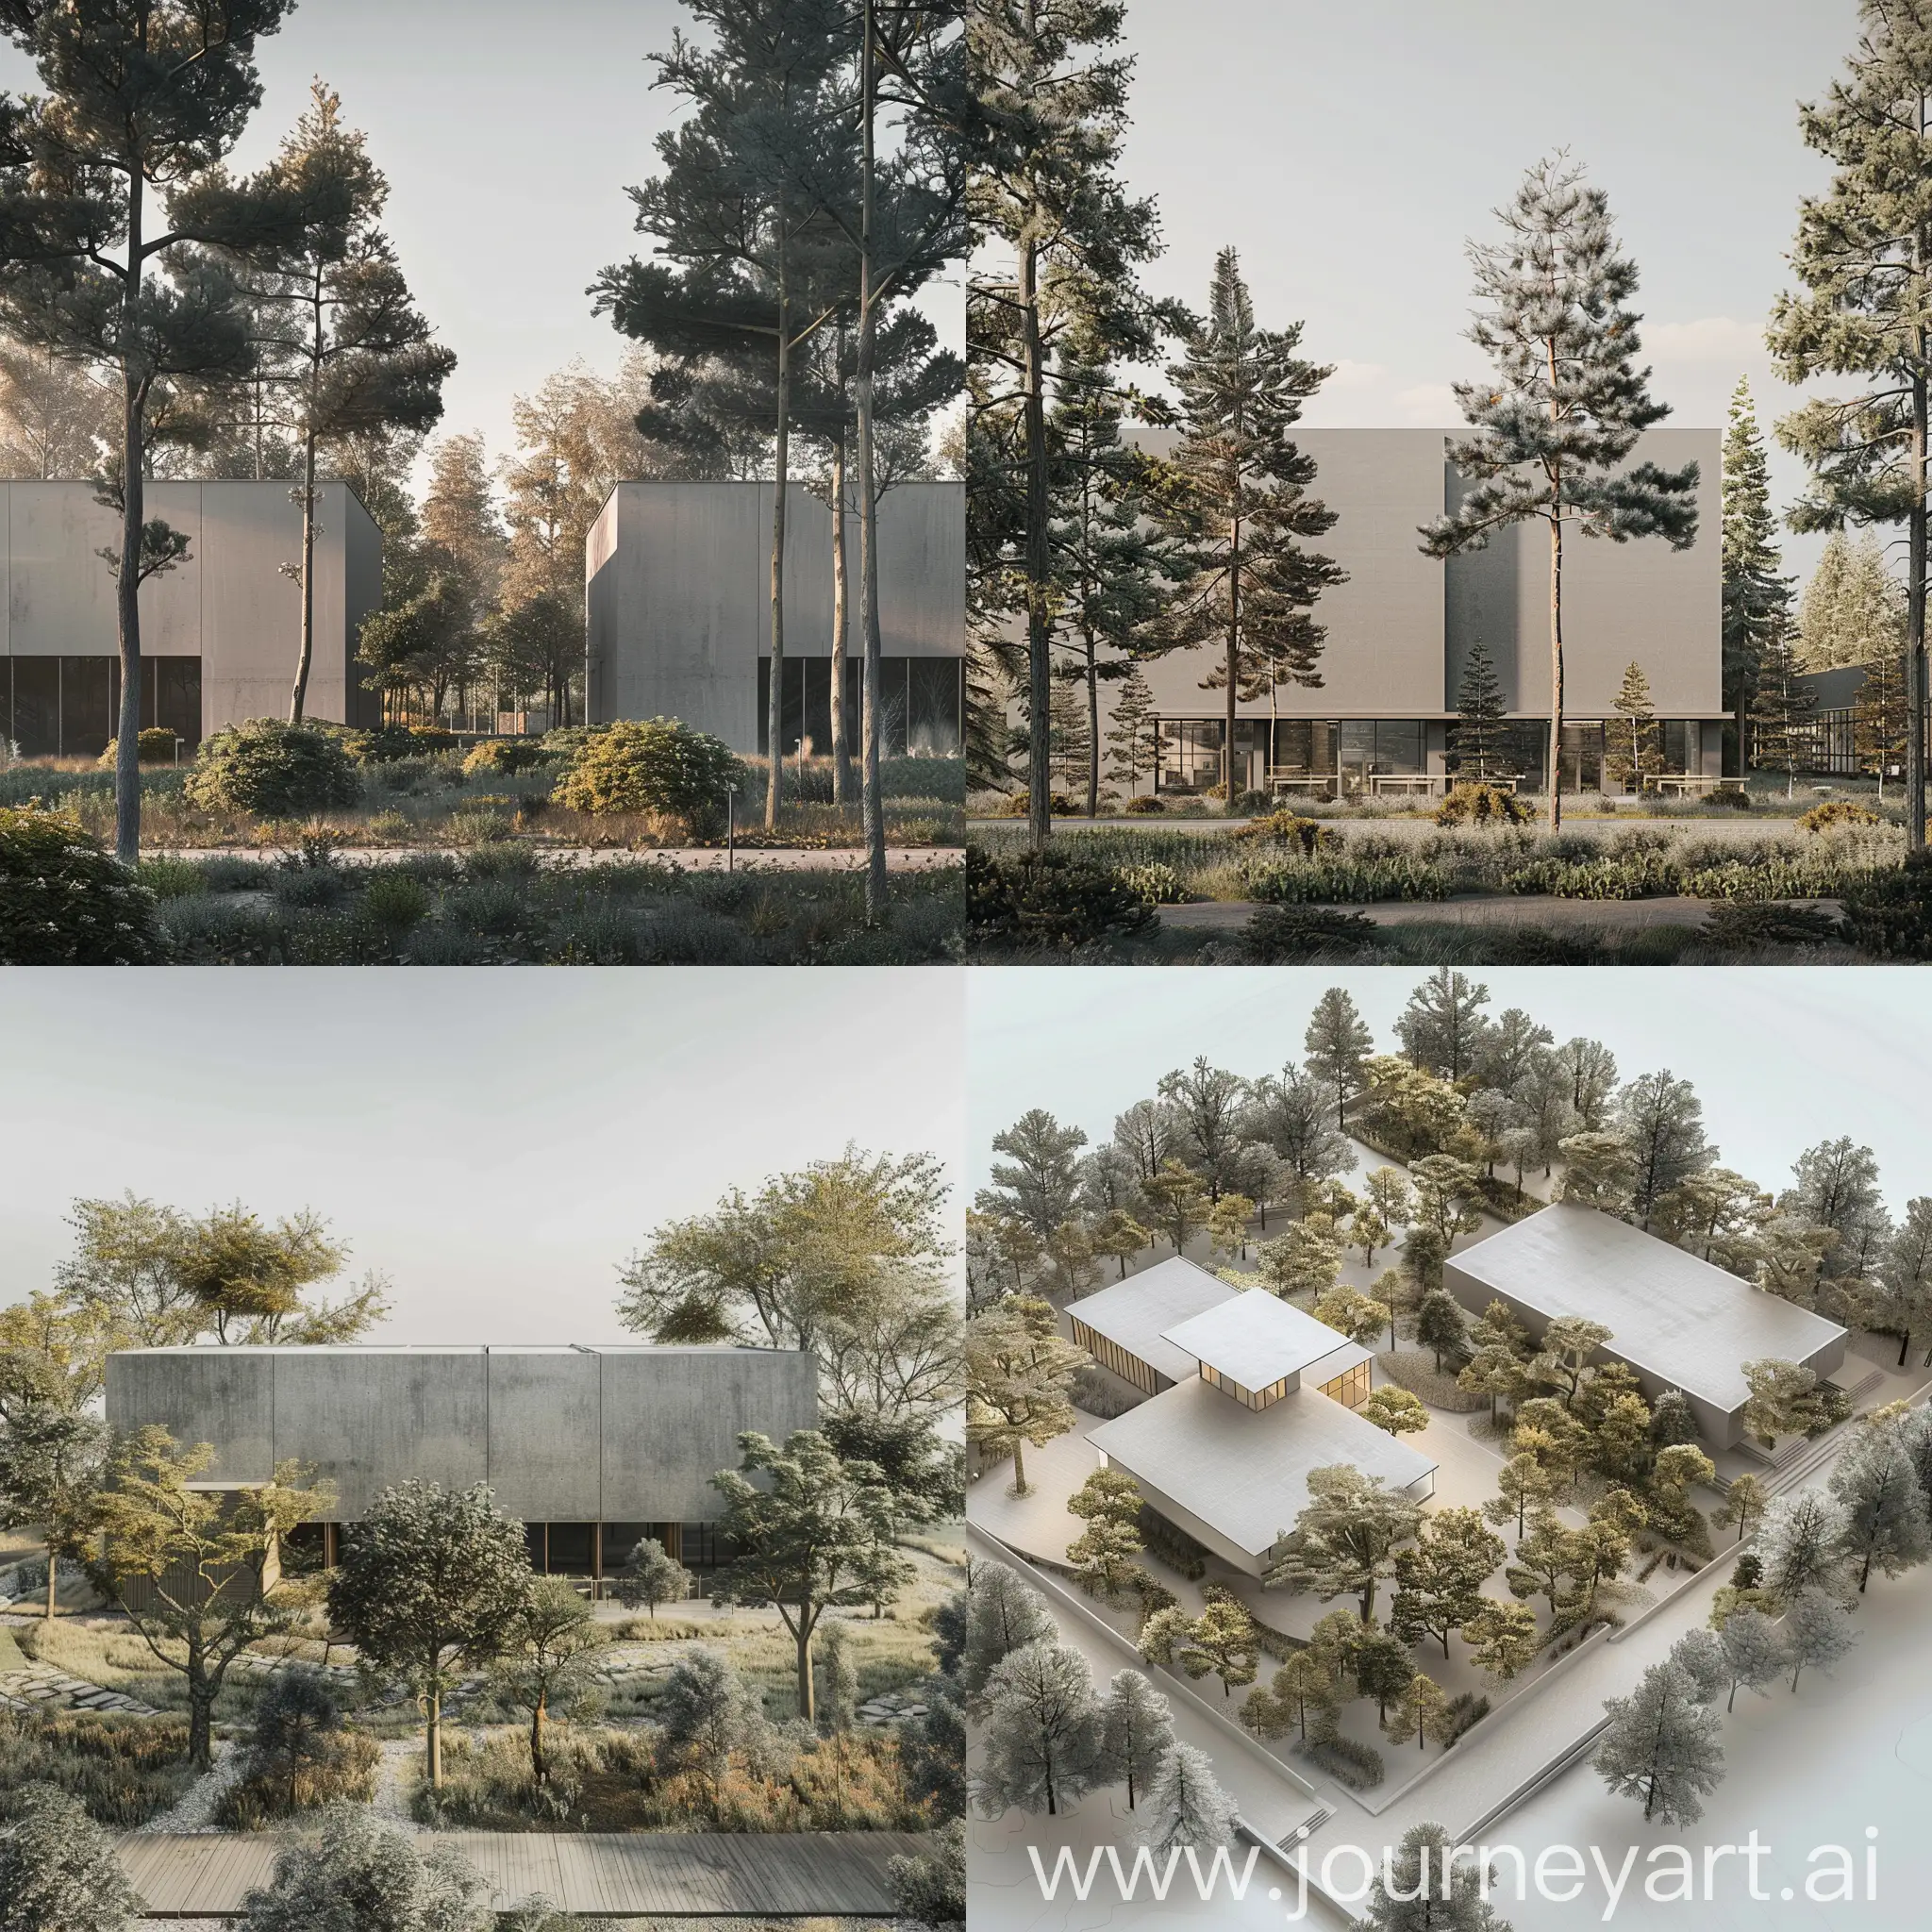 A two-storey plant research center in harmony with nature. Around the land are trees of different heights. The building is characterized by simple facades in gray. The project land is in a large garden.